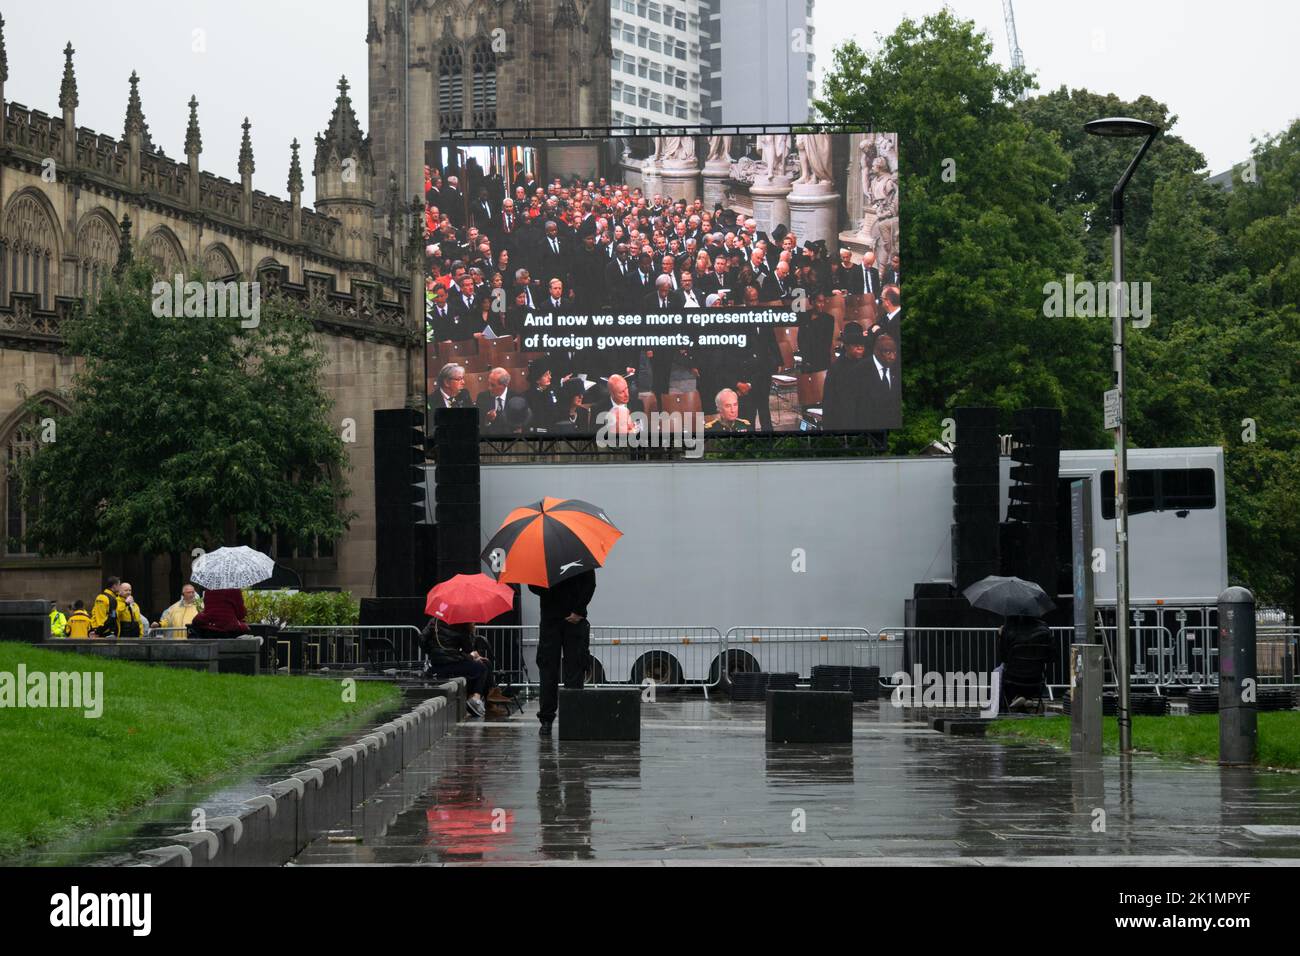 Electronic display screen in Cathedral Gardens showing funeral of monarch Queen Elizabeth II. People watching in rain with umbrellas. Stock Photo